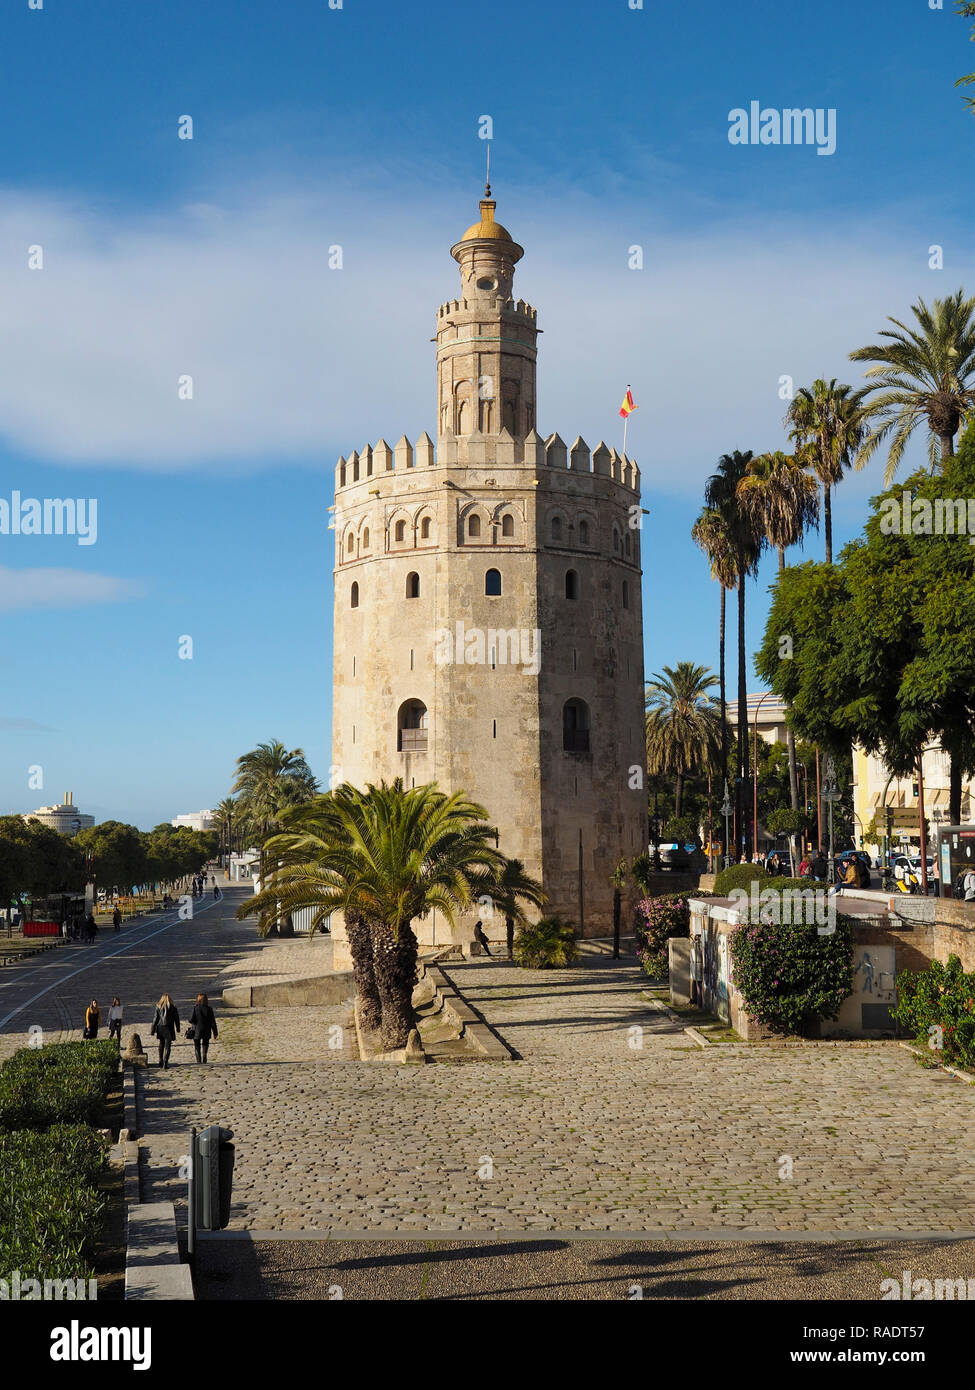 The Torre del Oro or golden tower on the bank of the guadalquivir river in the city center of Seville, Andalusia, Spain Stock Photo